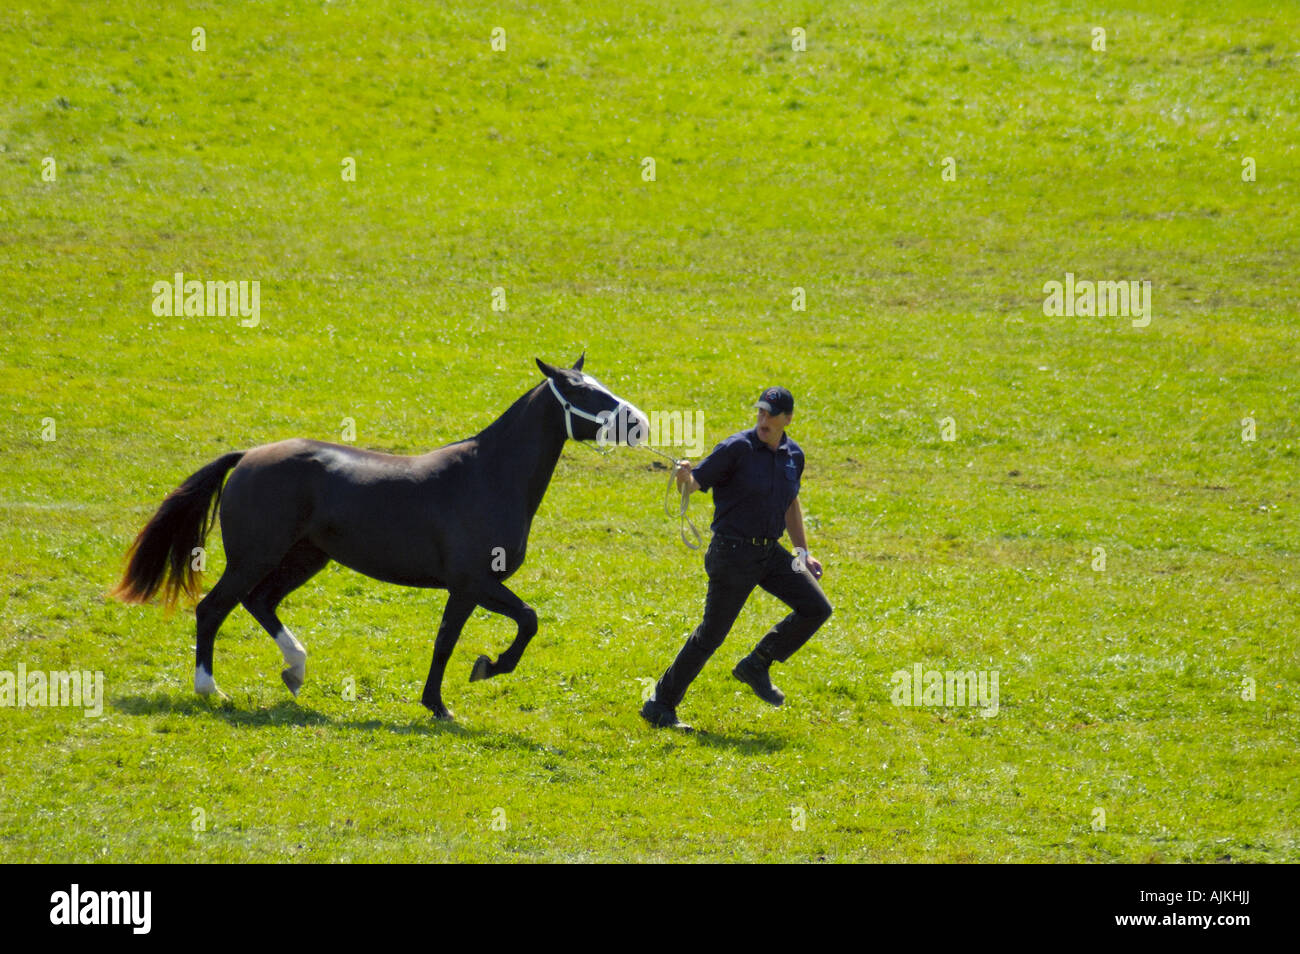 A man running with a horse across a green field Stock Photo